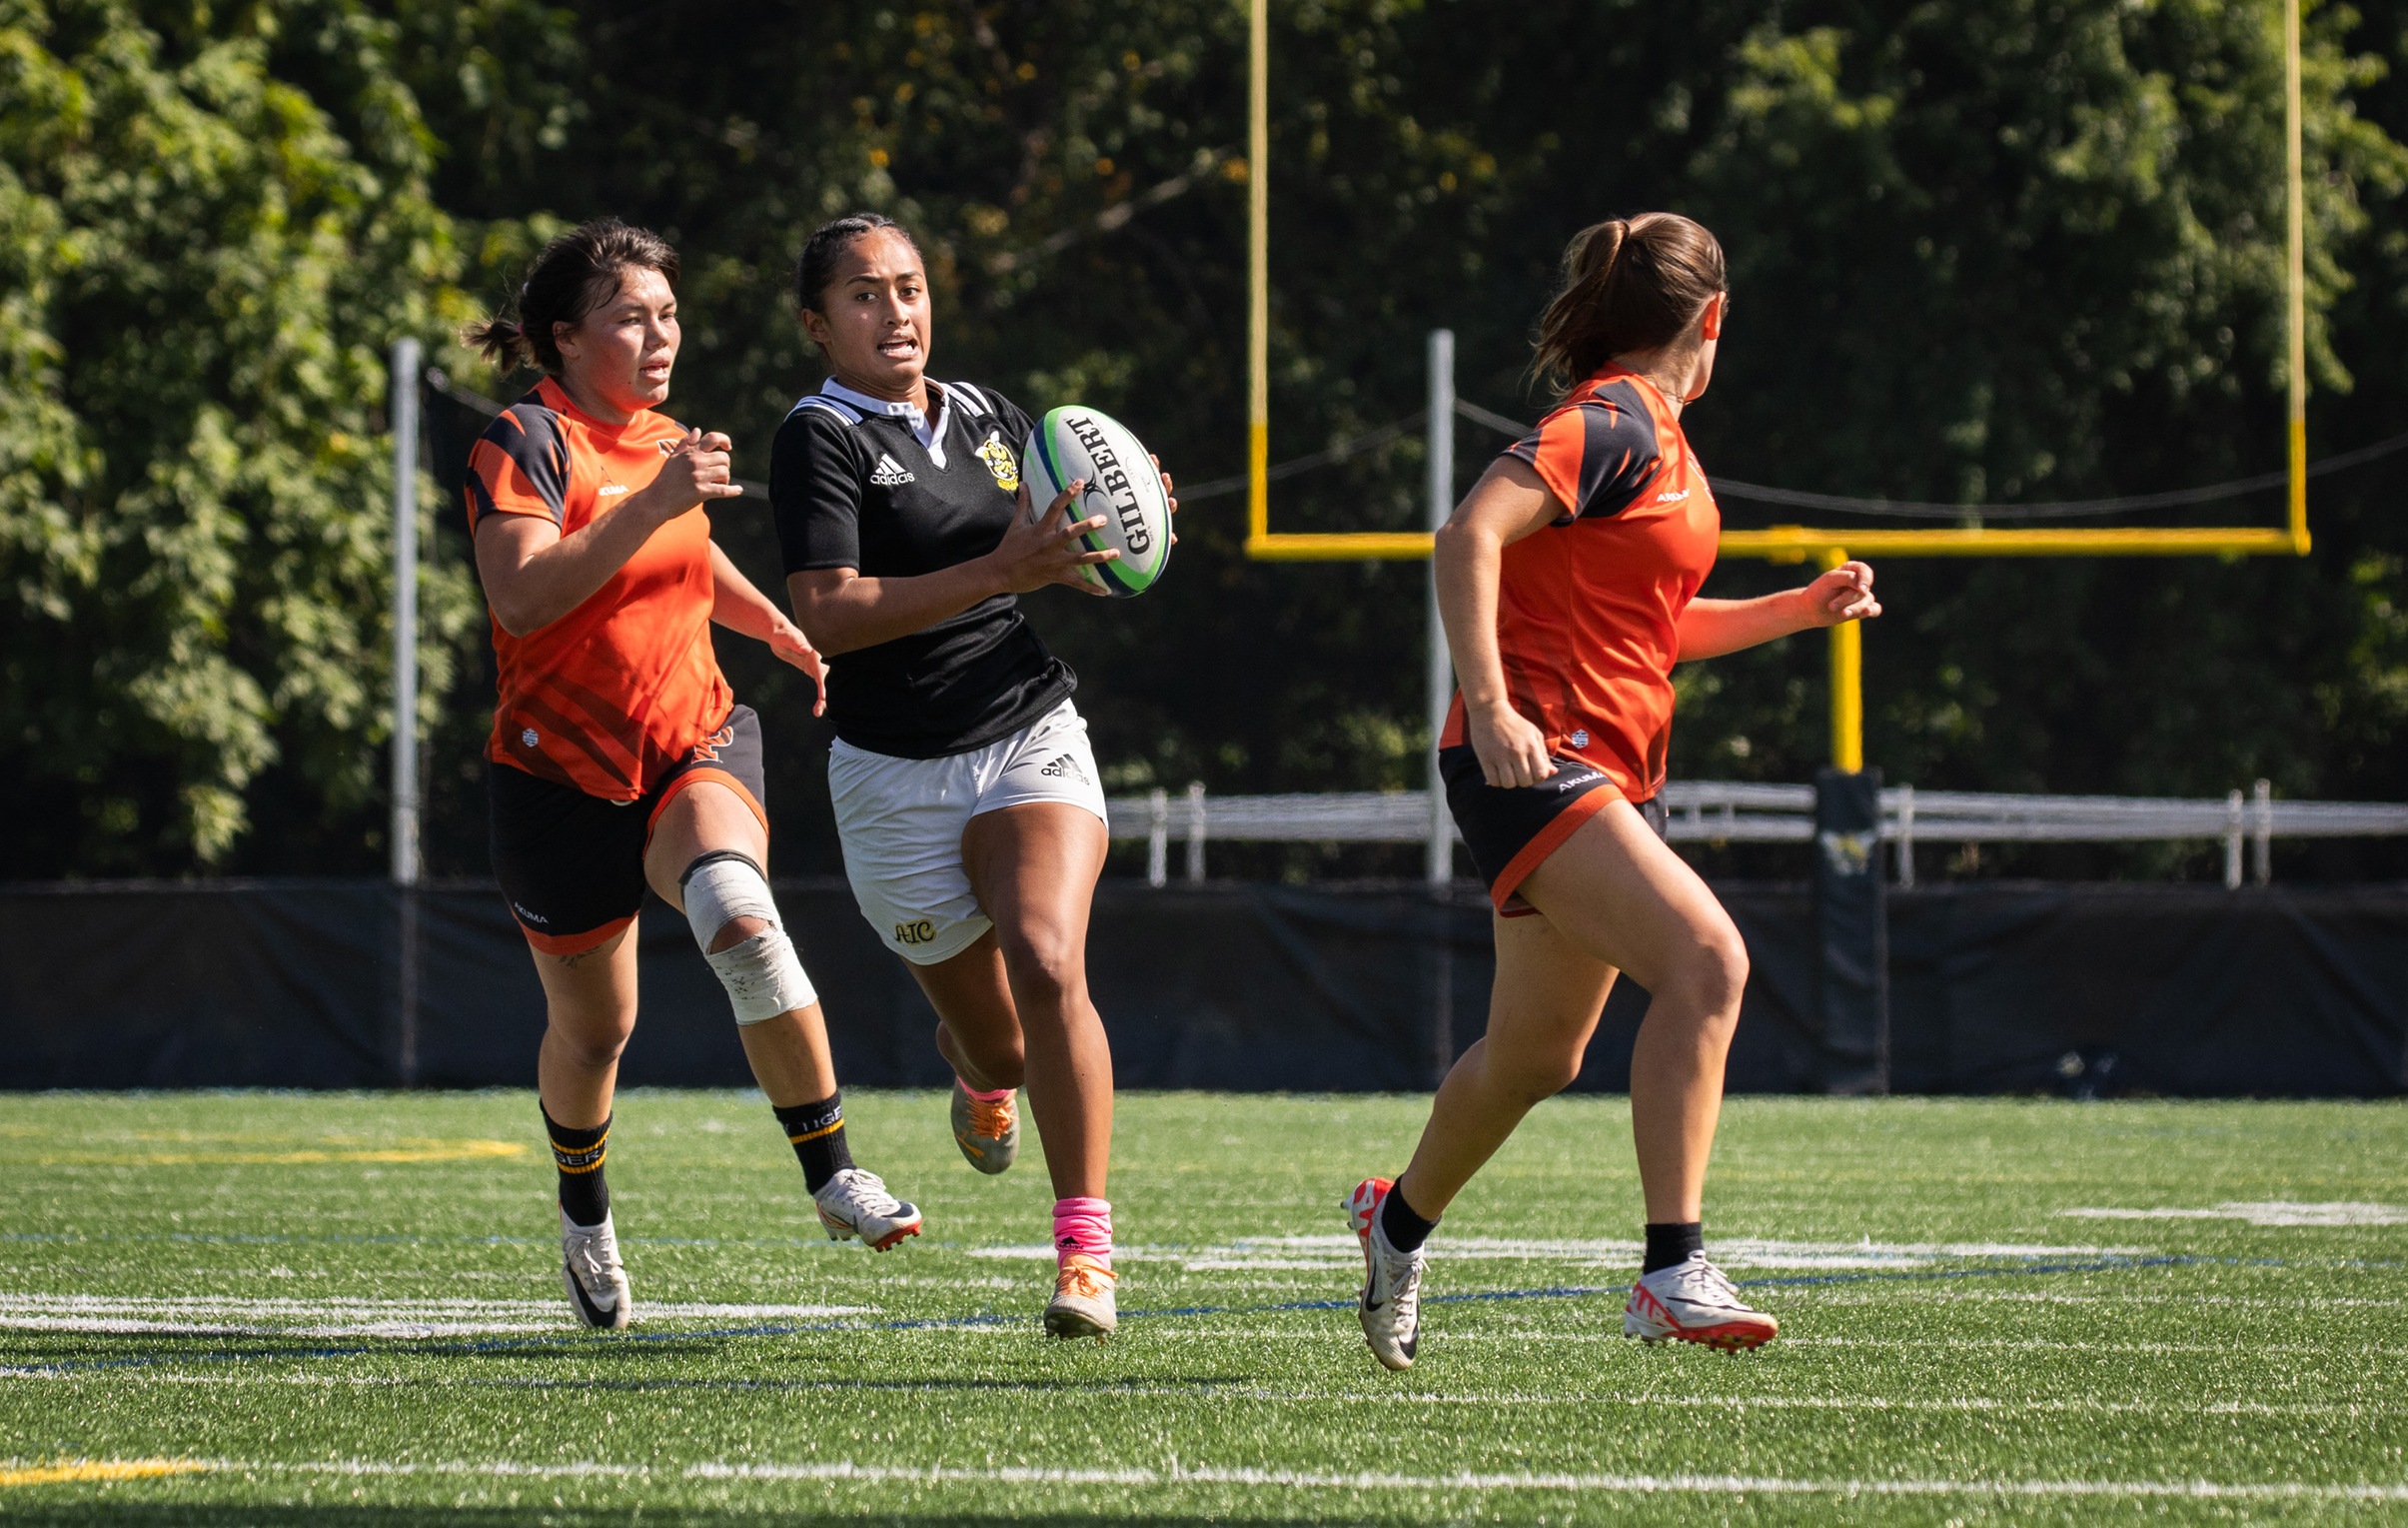 Sanft selected to USA U20s Focus Camp from Women's Rugby